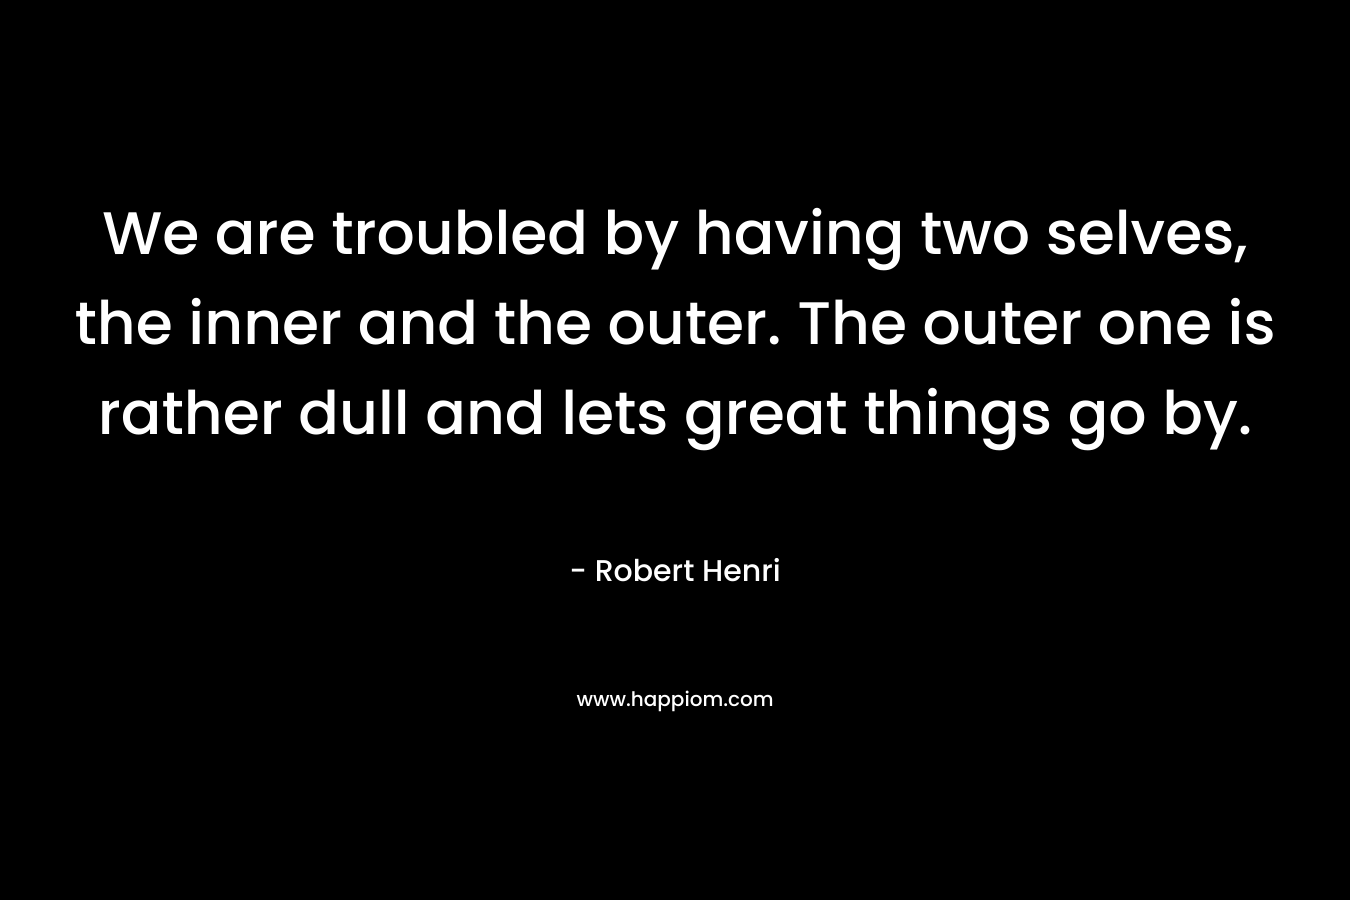 We are troubled by having two selves, the inner and the outer. The outer one is rather dull and lets great things go by. – Robert Henri